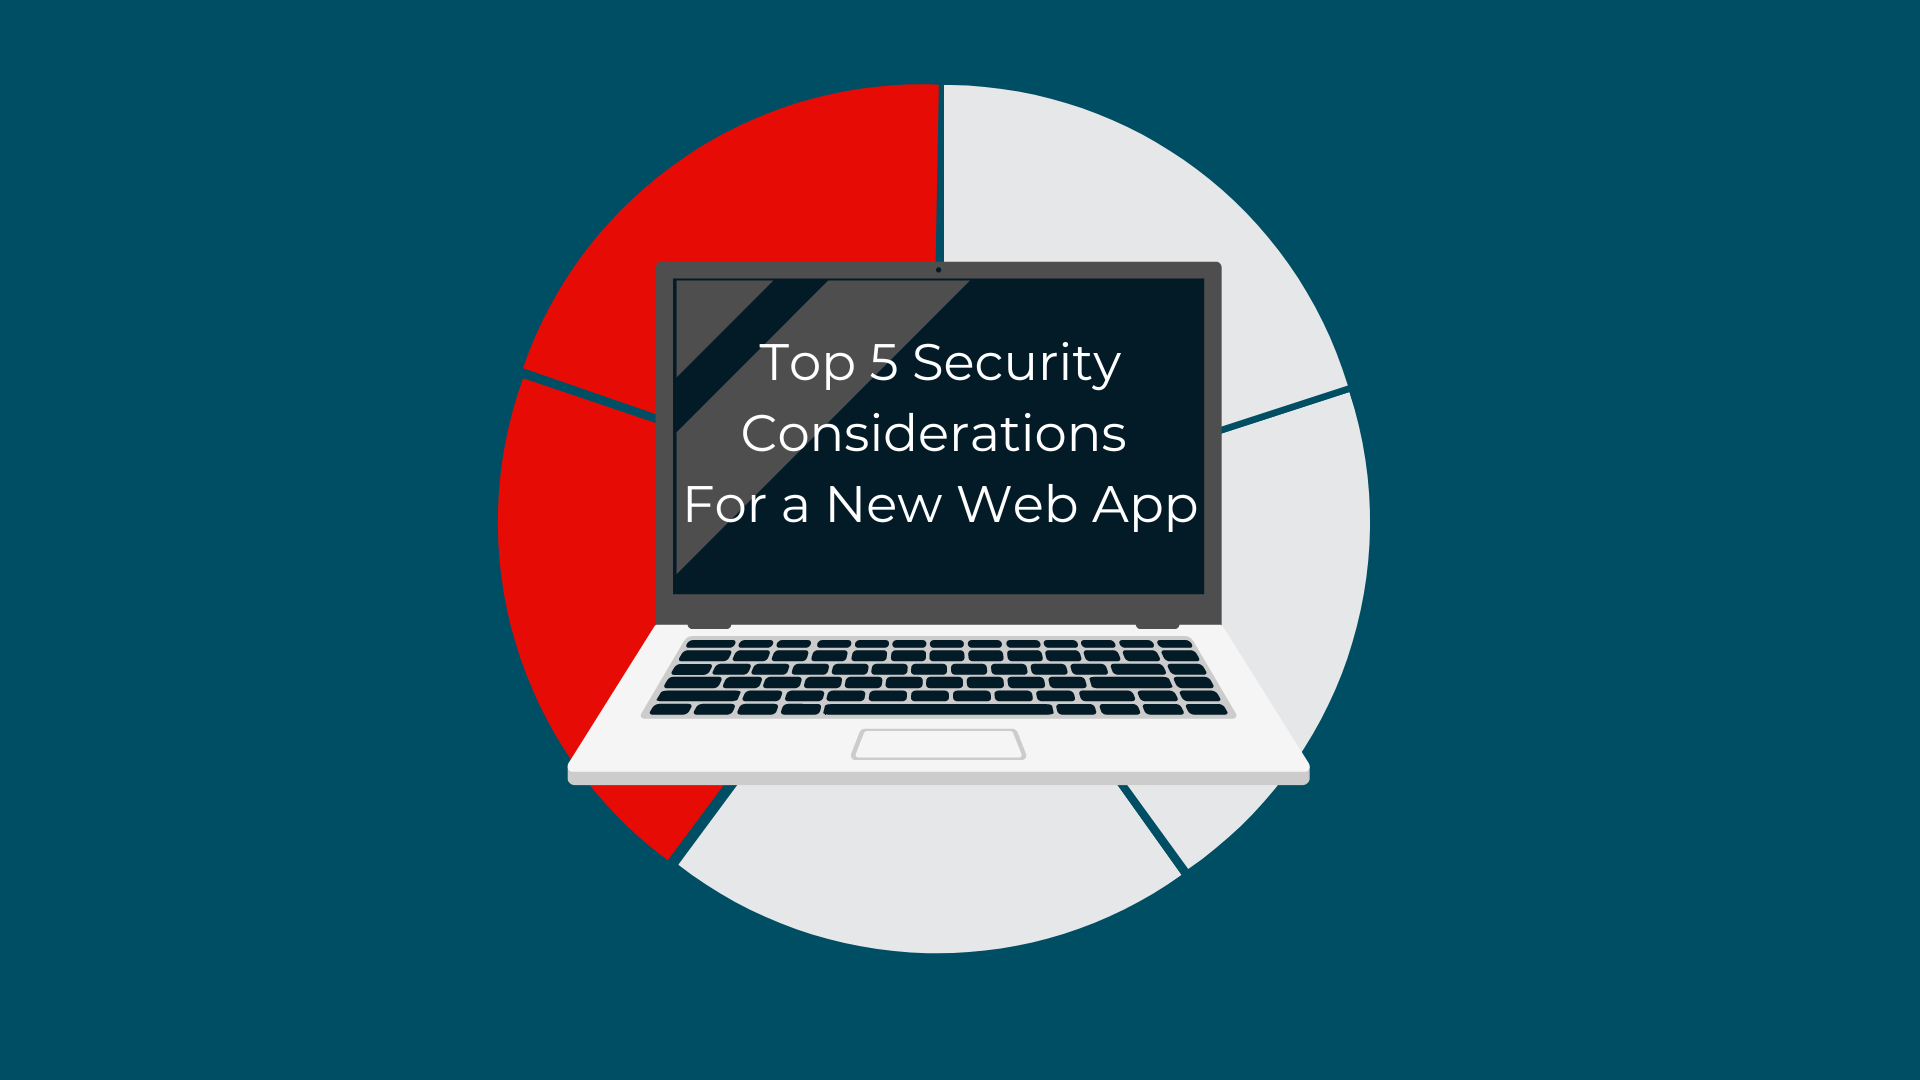 Top 5 Security Considerations for a New Web App - 3. Data Encryption and Protection